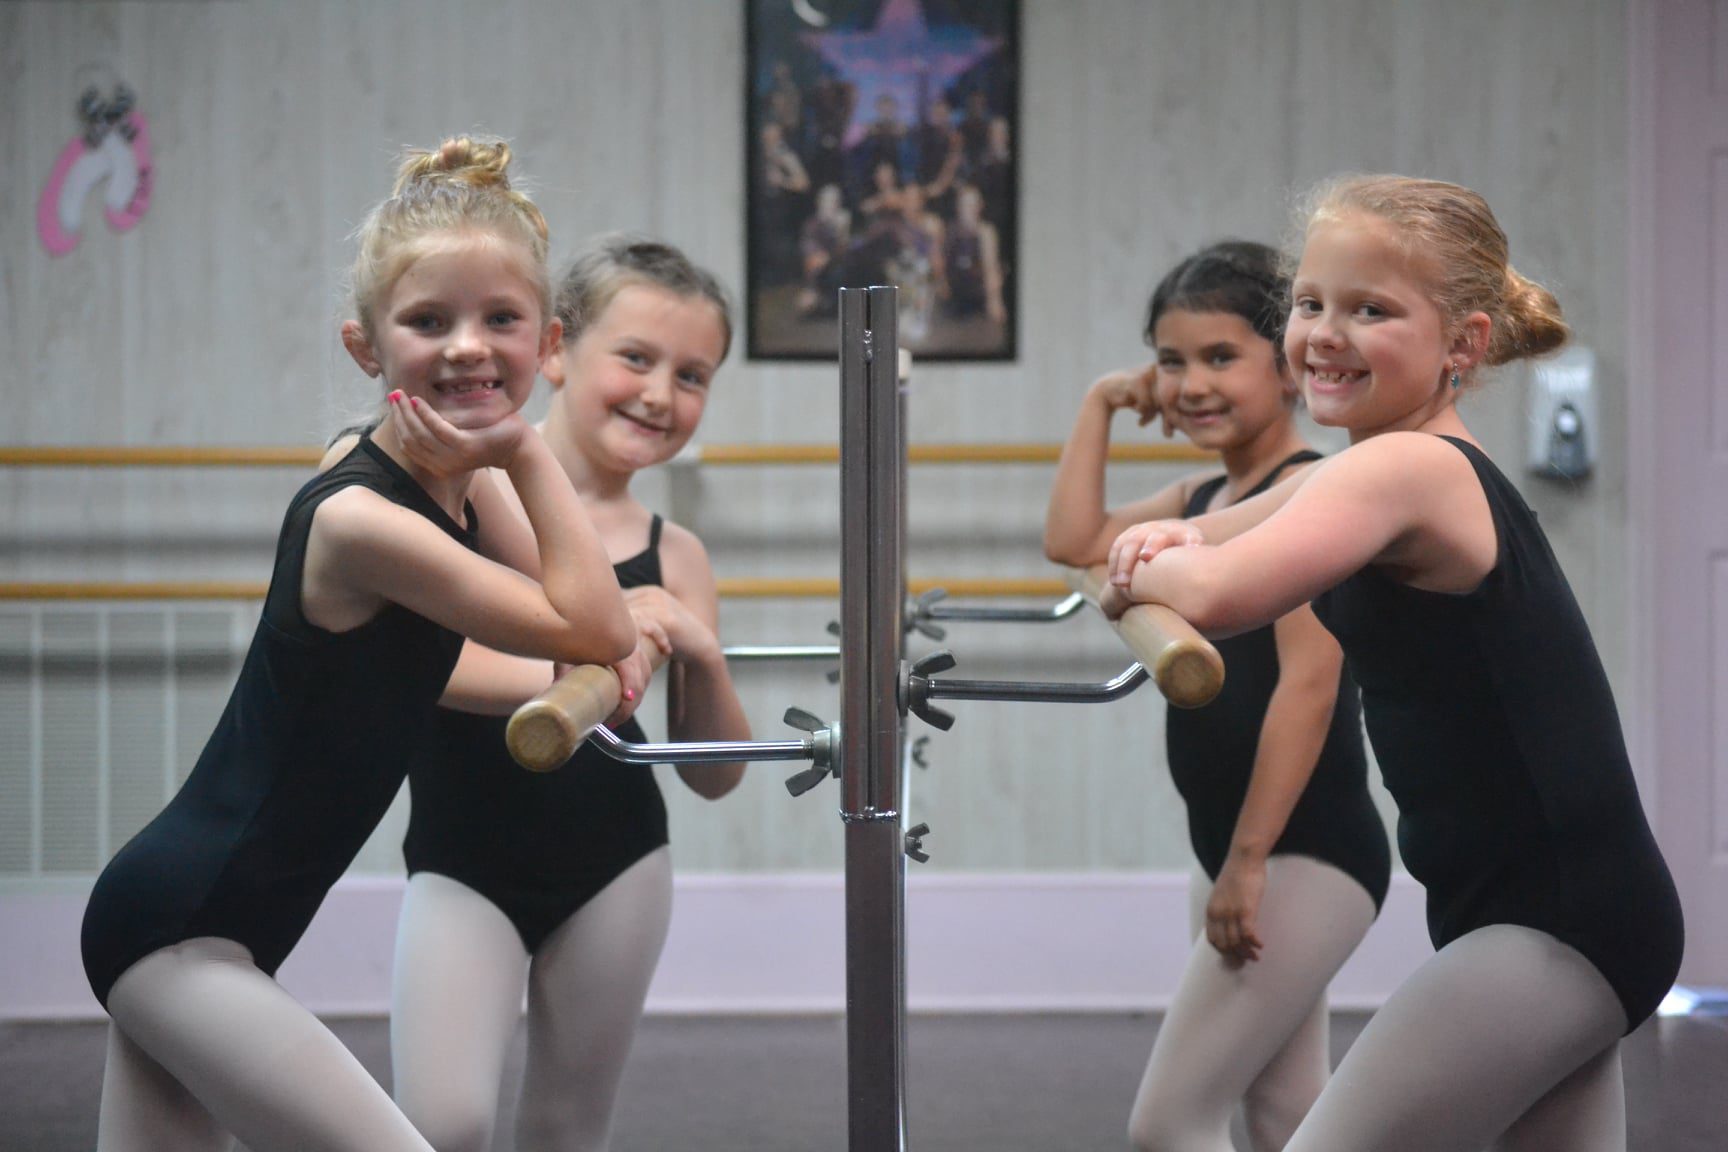 Girls in dance classes offered by Tilley's Dance Academy